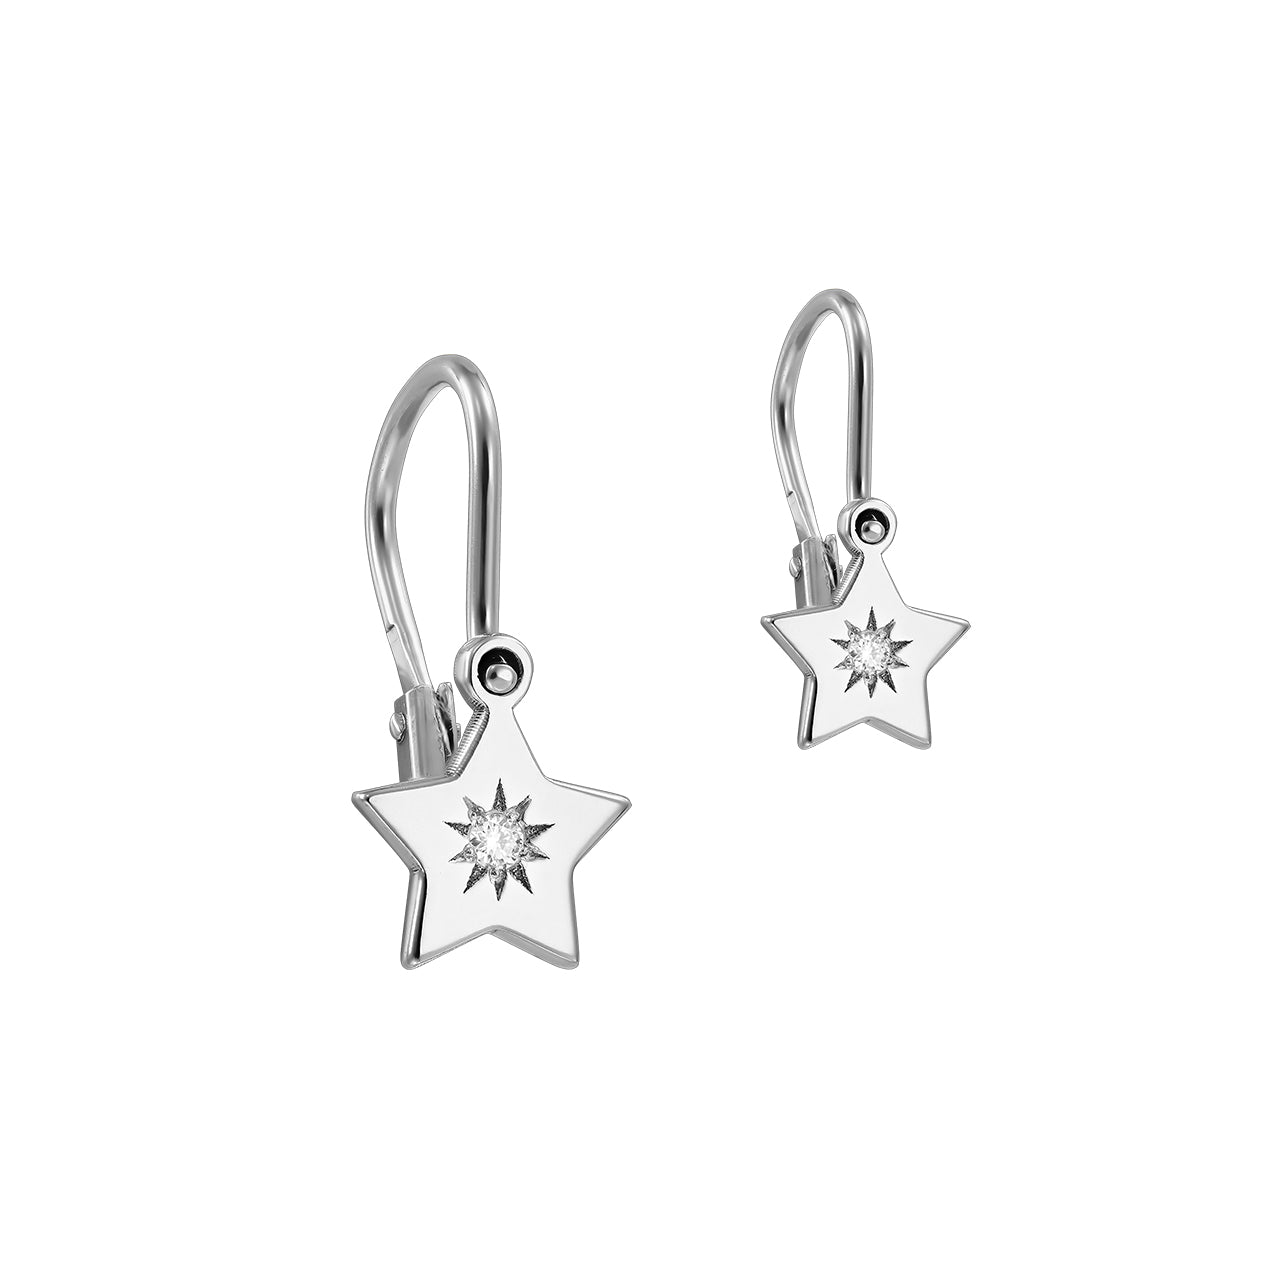 Baby Earrings Baby Star with white diamonds, in white gold - zeaetsia